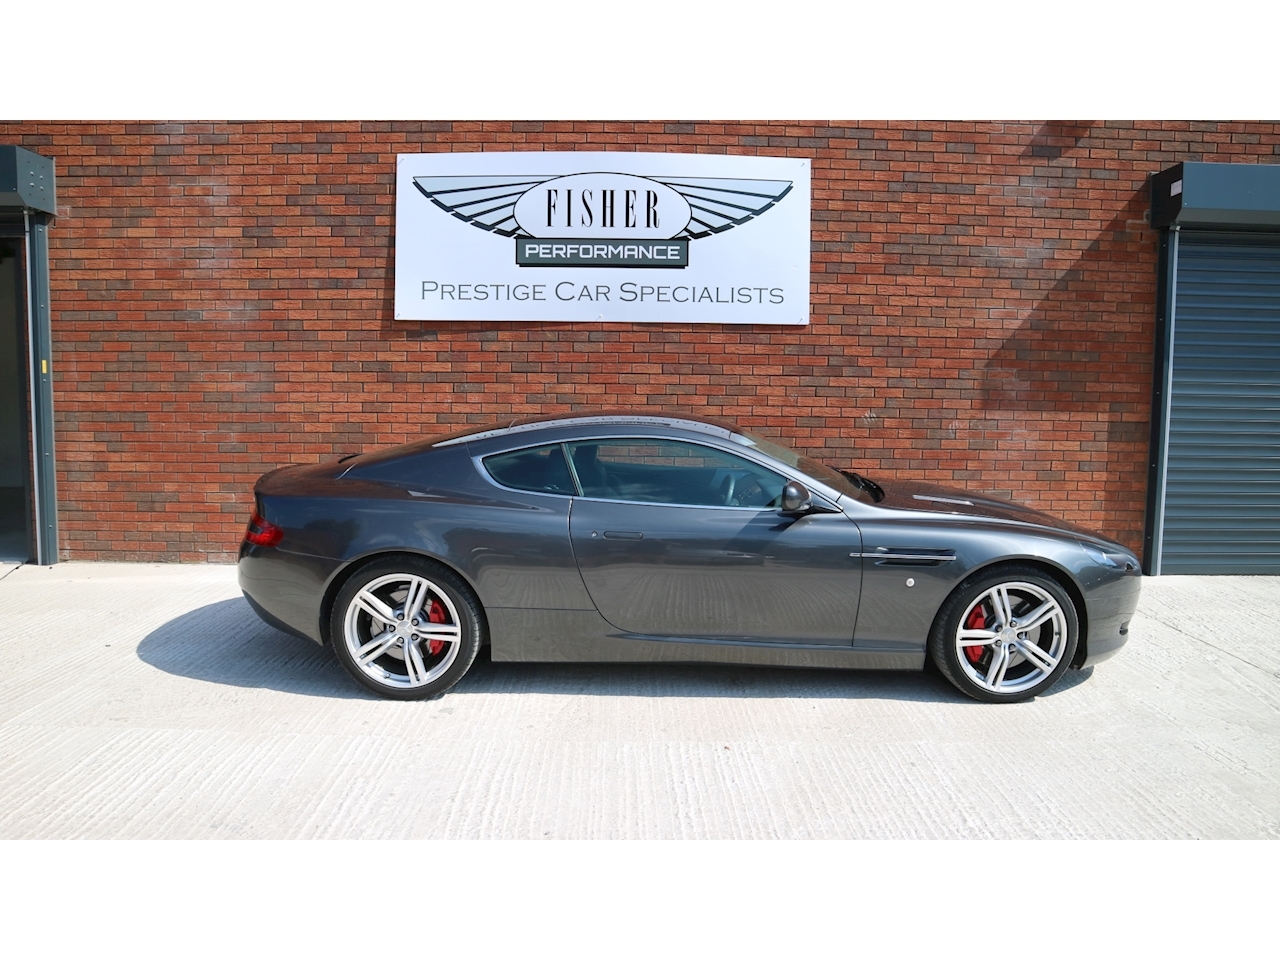 DB9 V12 5.9 2dr Coupe Automatic Petrol